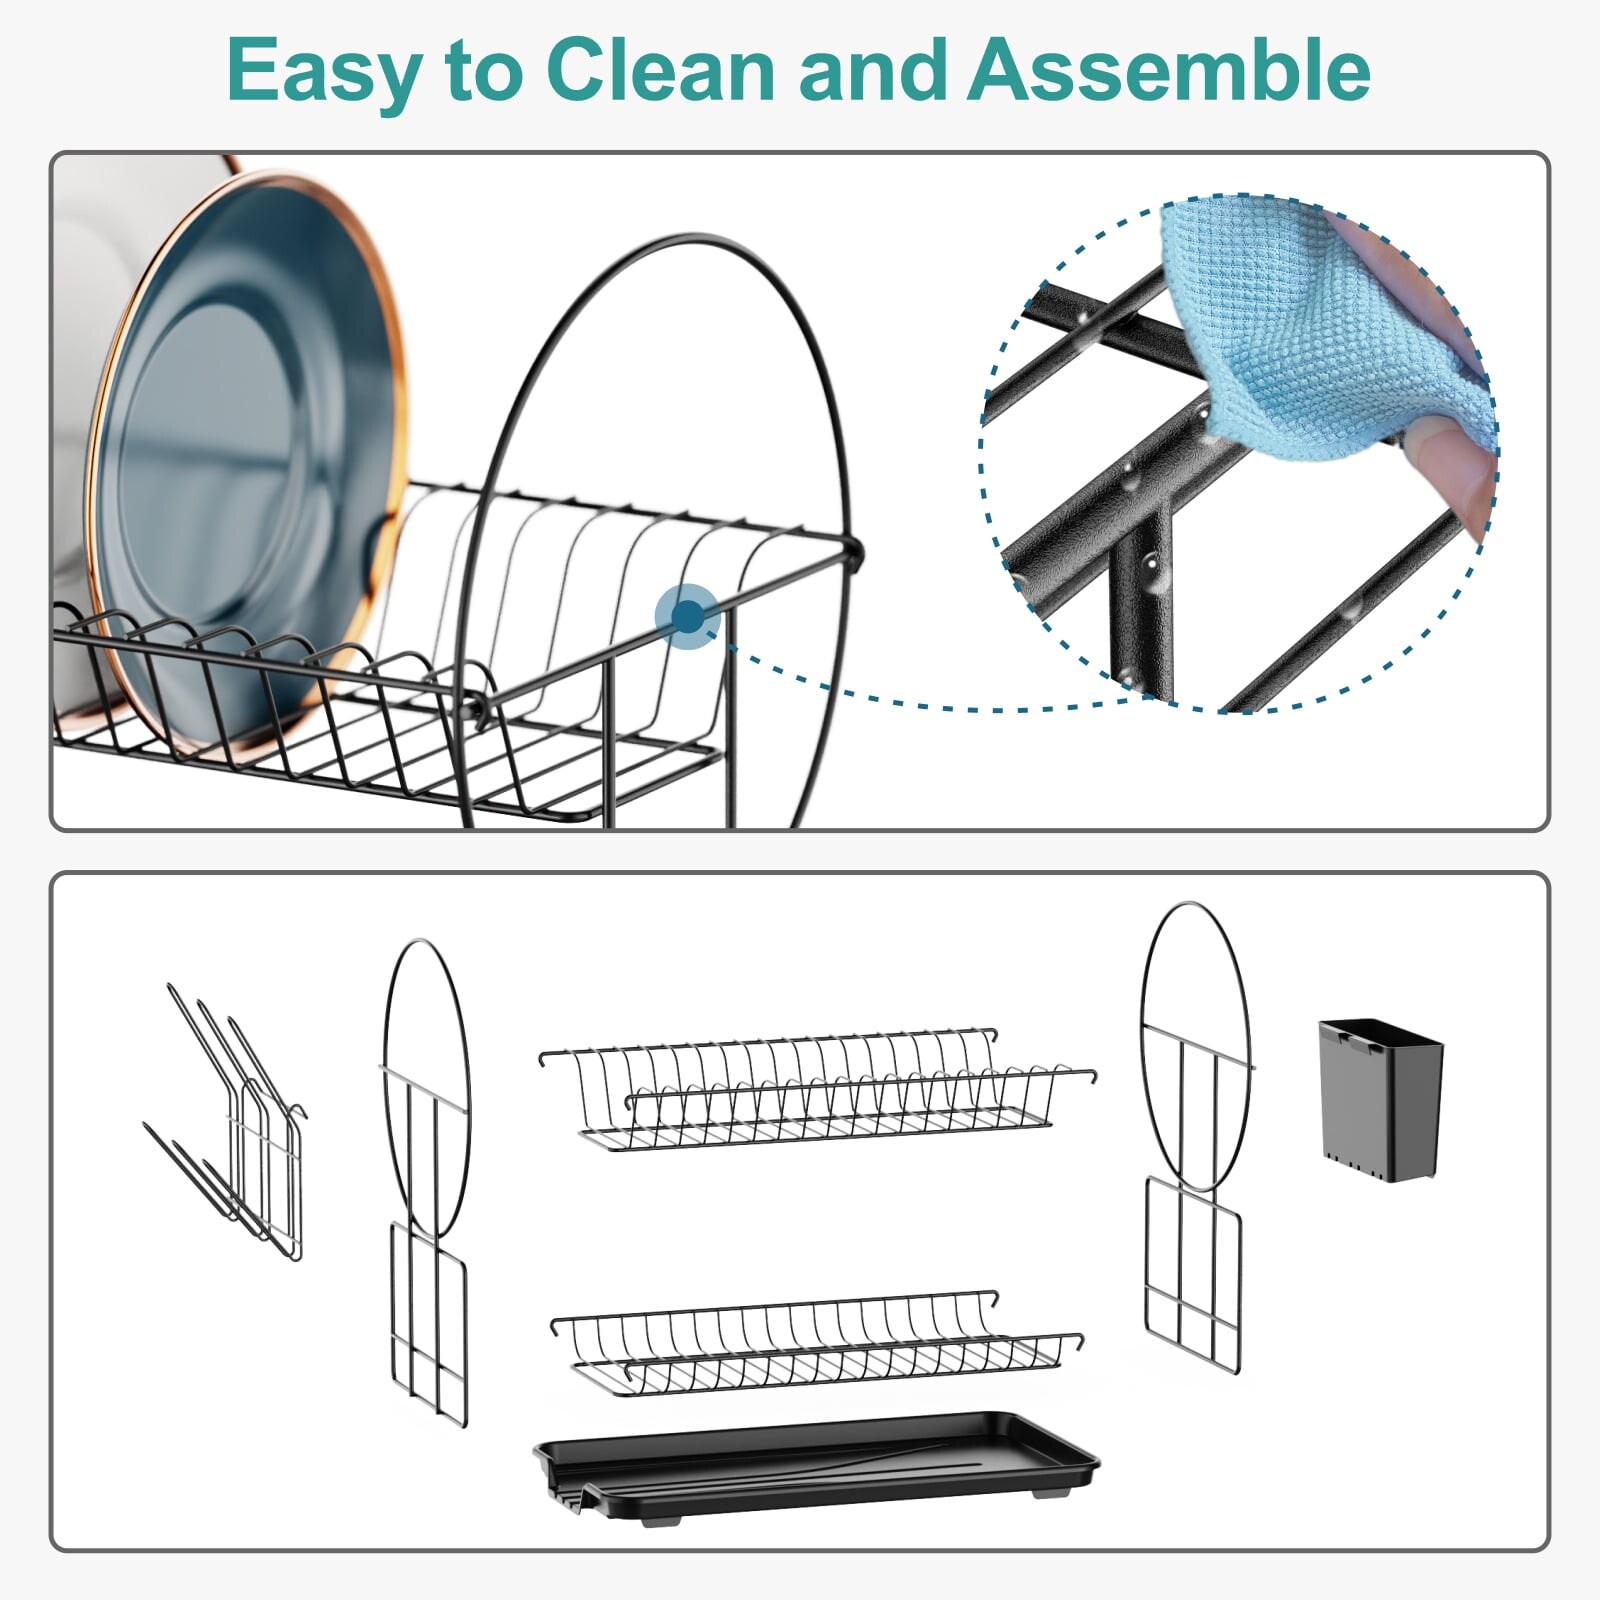 https://ak1.ostkcdn.com/images/products/is/images/direct/dc8f23df6eac0f3950f1a6067fc63e9c1d60c3c8/2-Tier-Dish-Rack-with-Drainer-Board.jpg